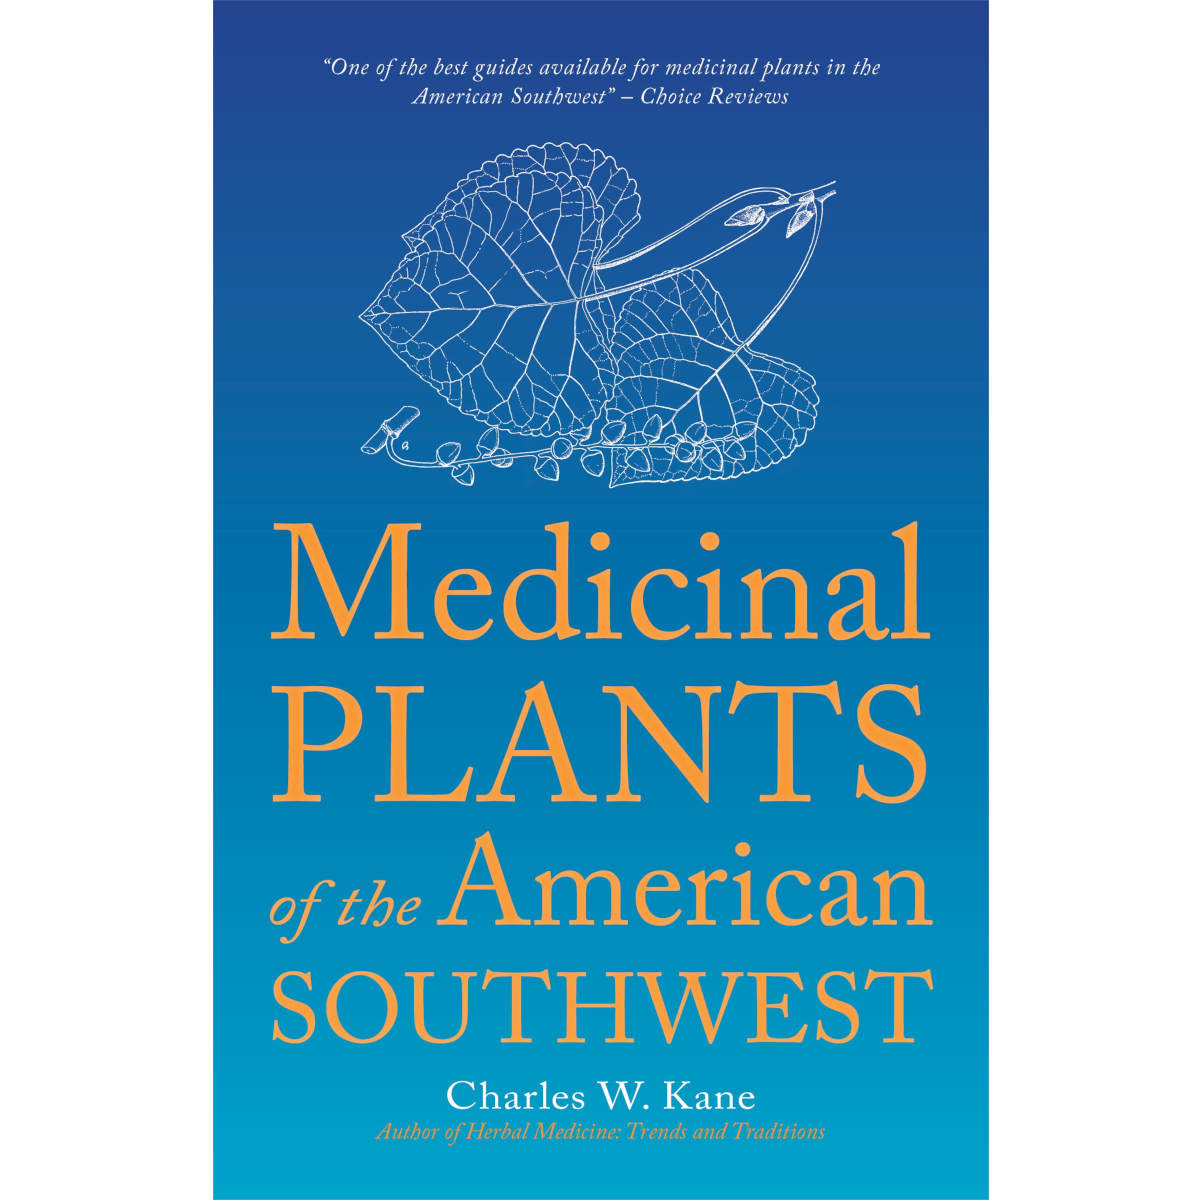 Medicinal Plants of the American Southwest